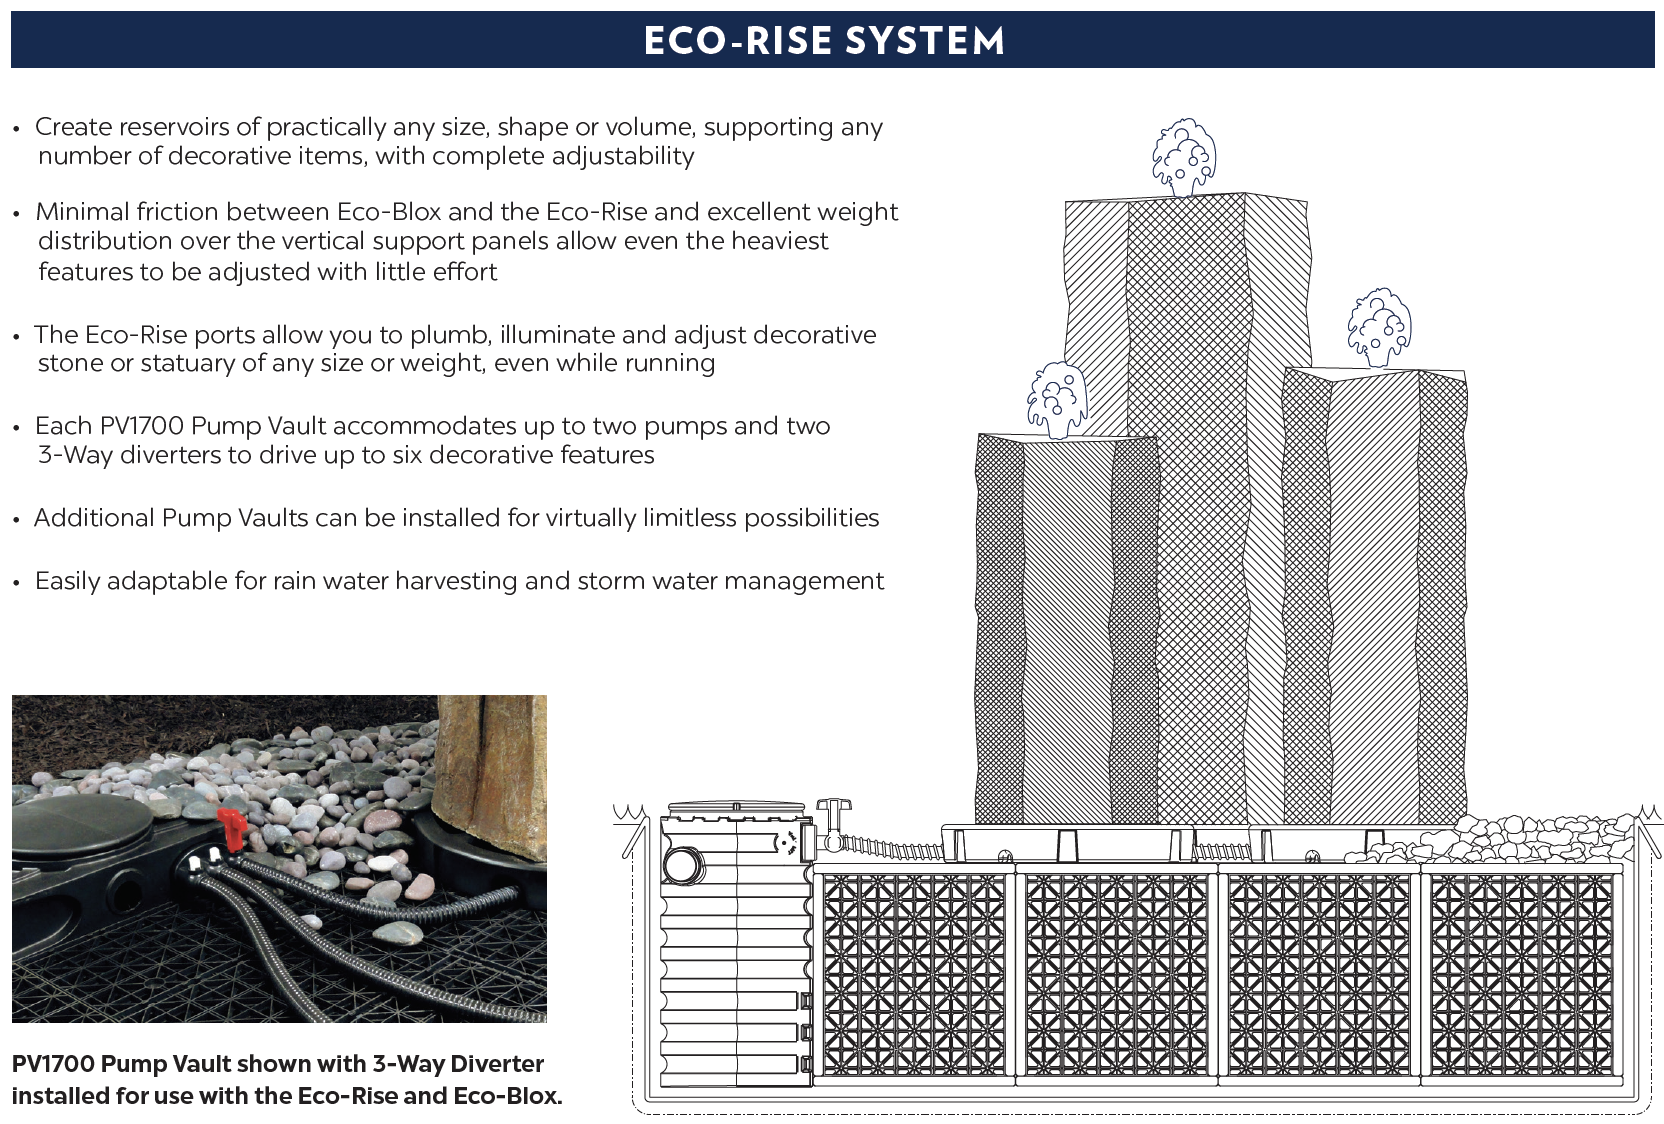 Eco-Rise System